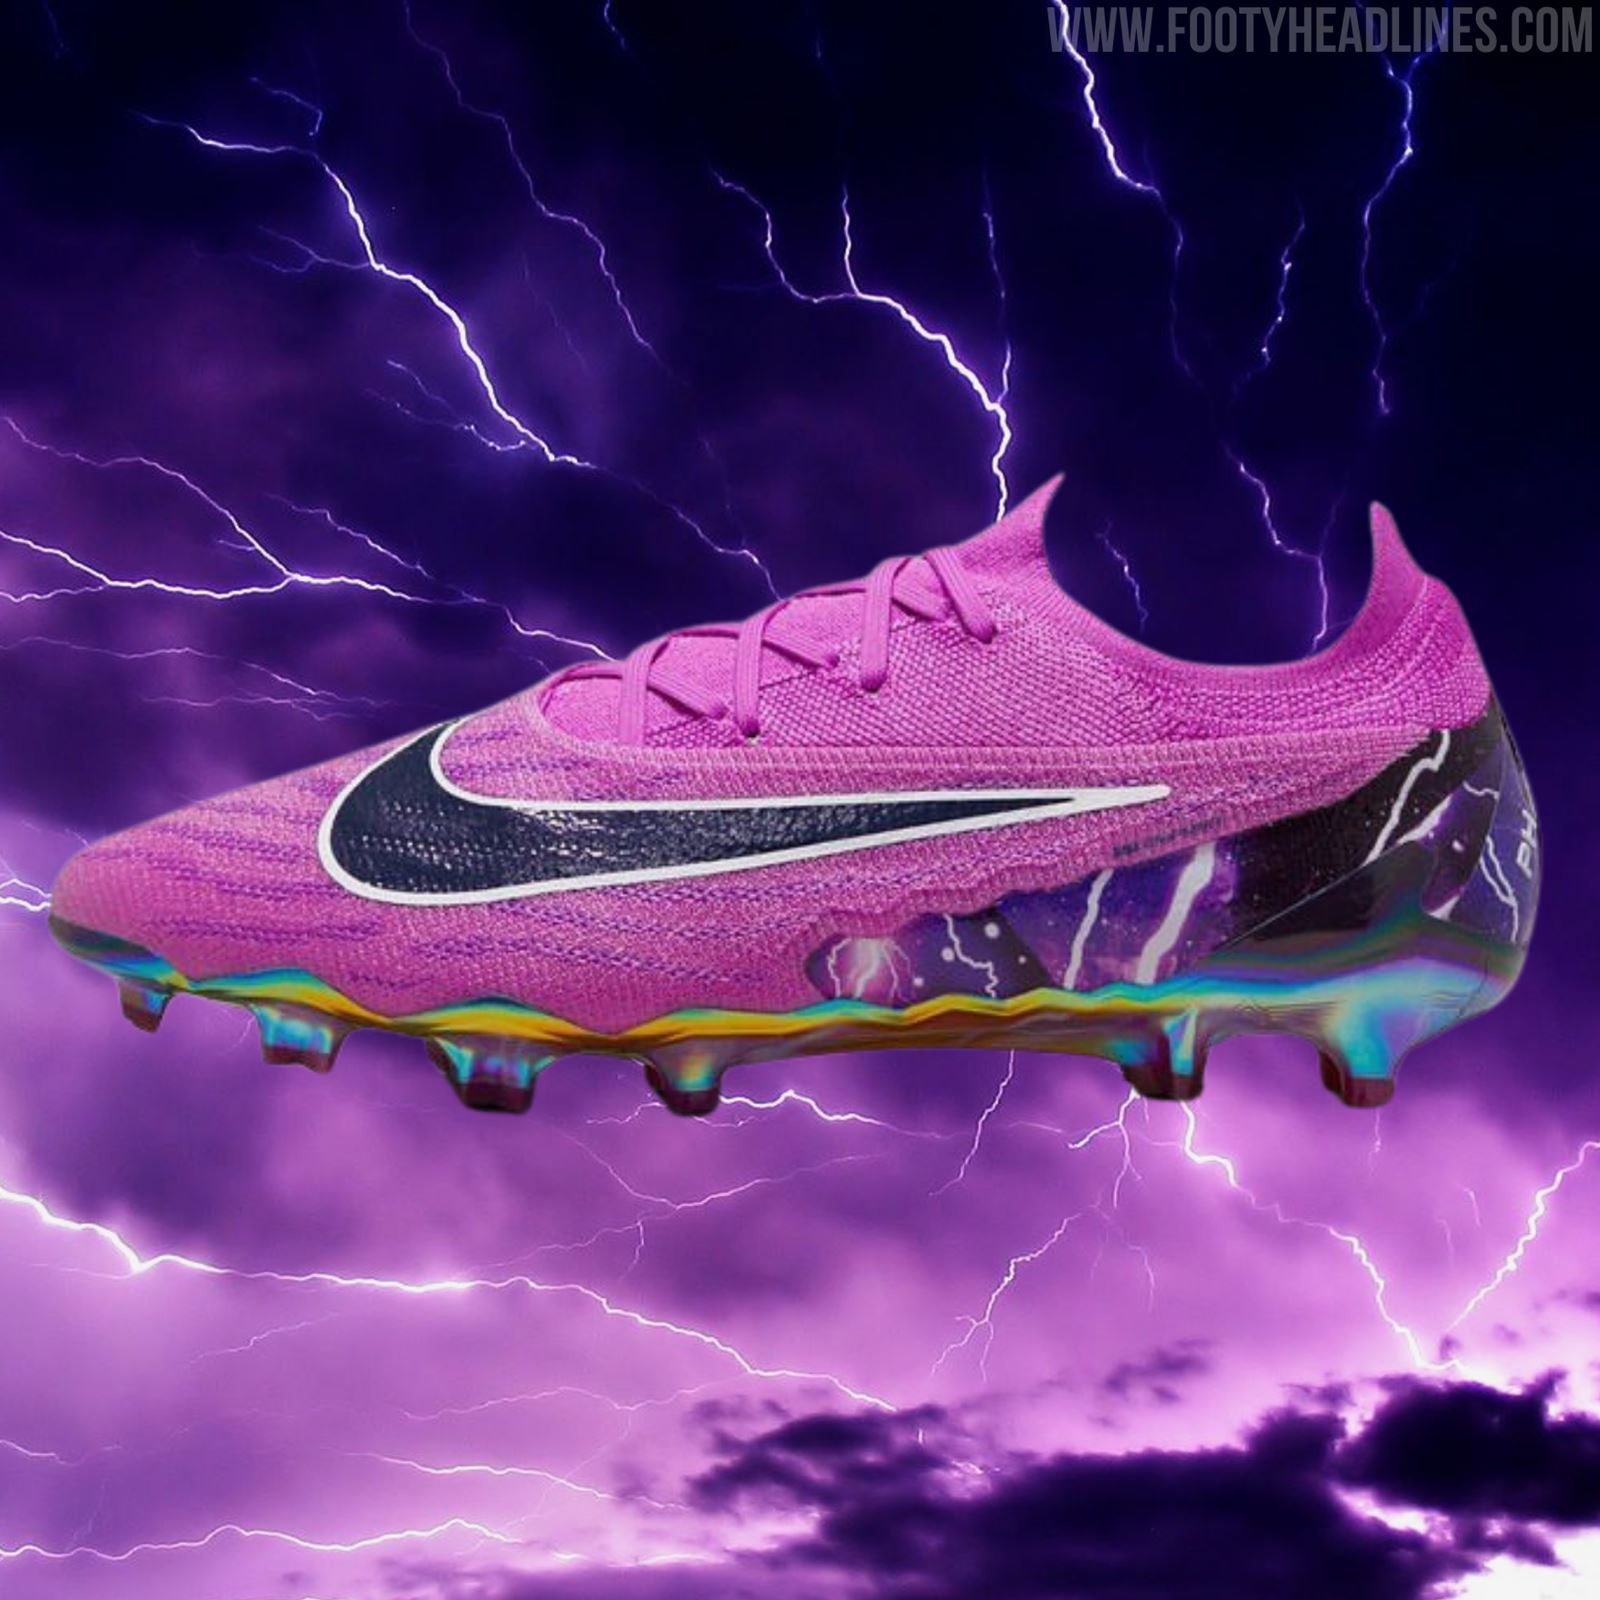 Special Nike Phantom Thunder Boots Collection Revealed - Footy